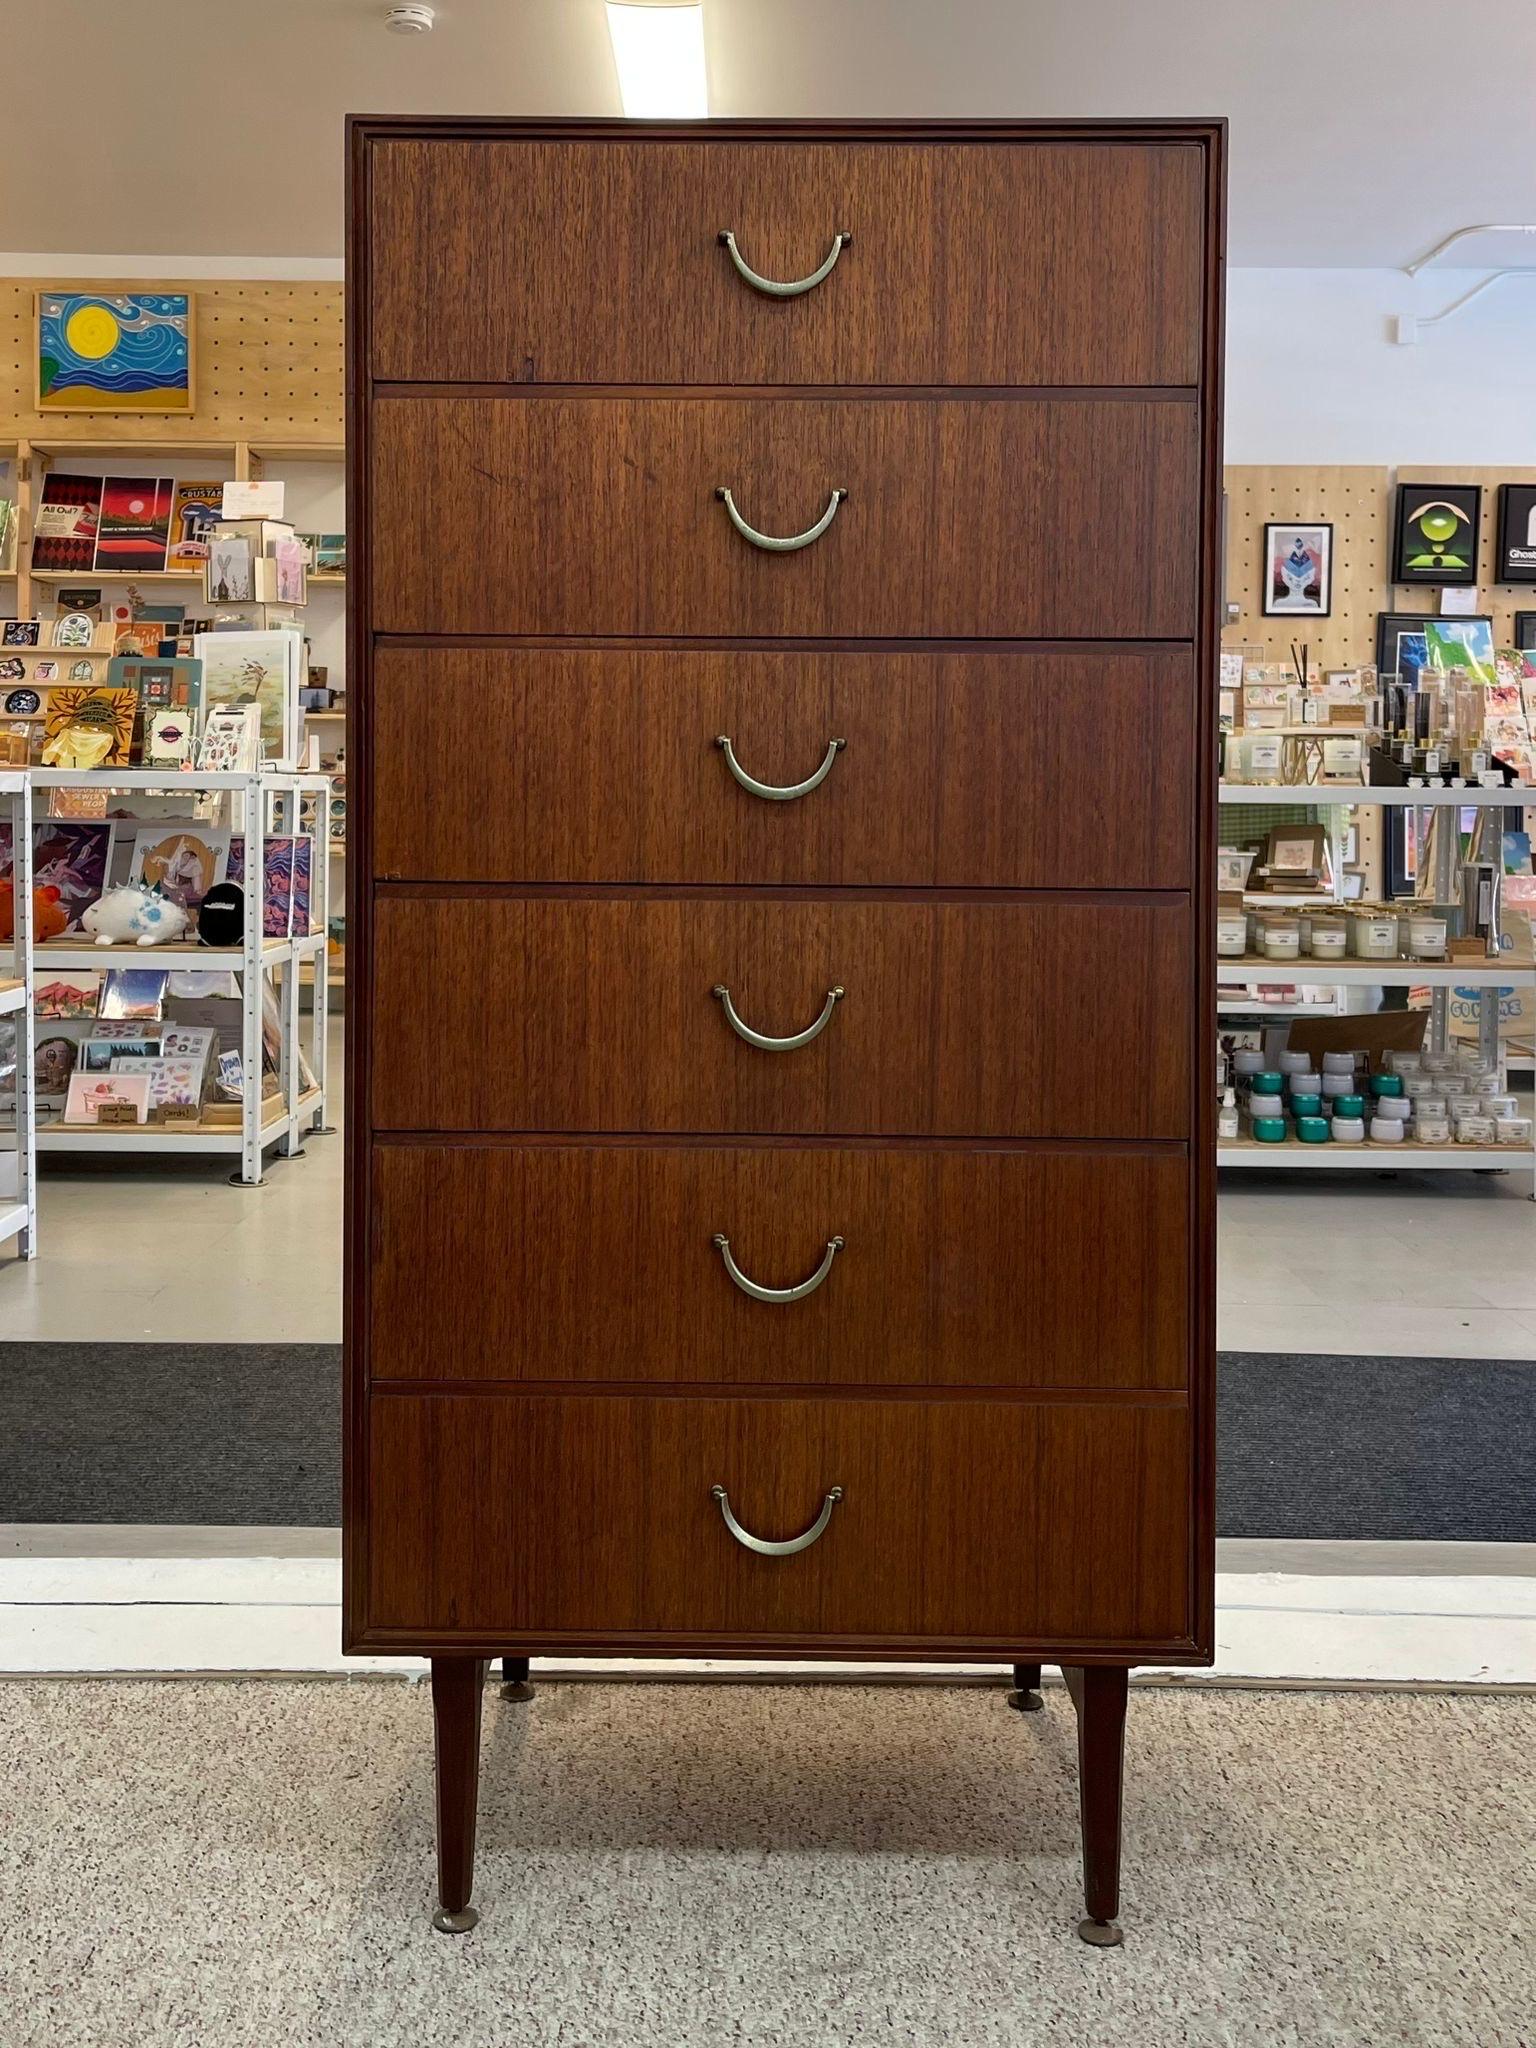 Walnut Toned piece with 6 dovetailed drawers and original brass toned handles. Tapered Legs. Makers mark in the back of the top drawer. Vintage Condition Consistent with Age as Pictured. Circa 1960s.

Dimensions. 24 W ; 18 D ; 50 H